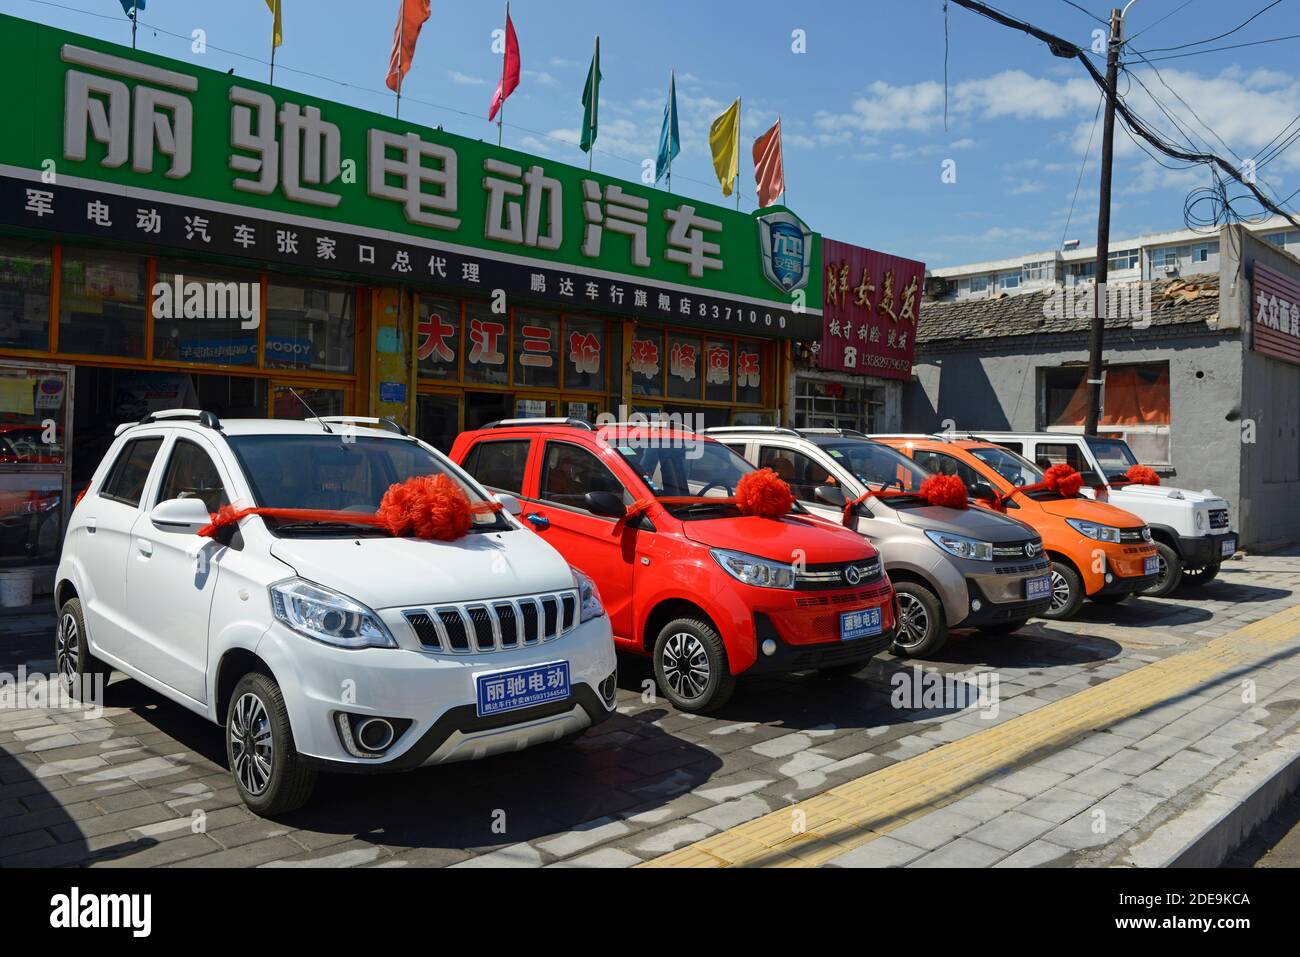 https://c8.alamy.com/comp/2DE9KCA/a-range-of-new-small-electric-cars-stands-ready-for-sale-outside-a-lichi-brand-car-dealers-in-xuanhua-city-hebei-province-china-2DE9KCA.jpg